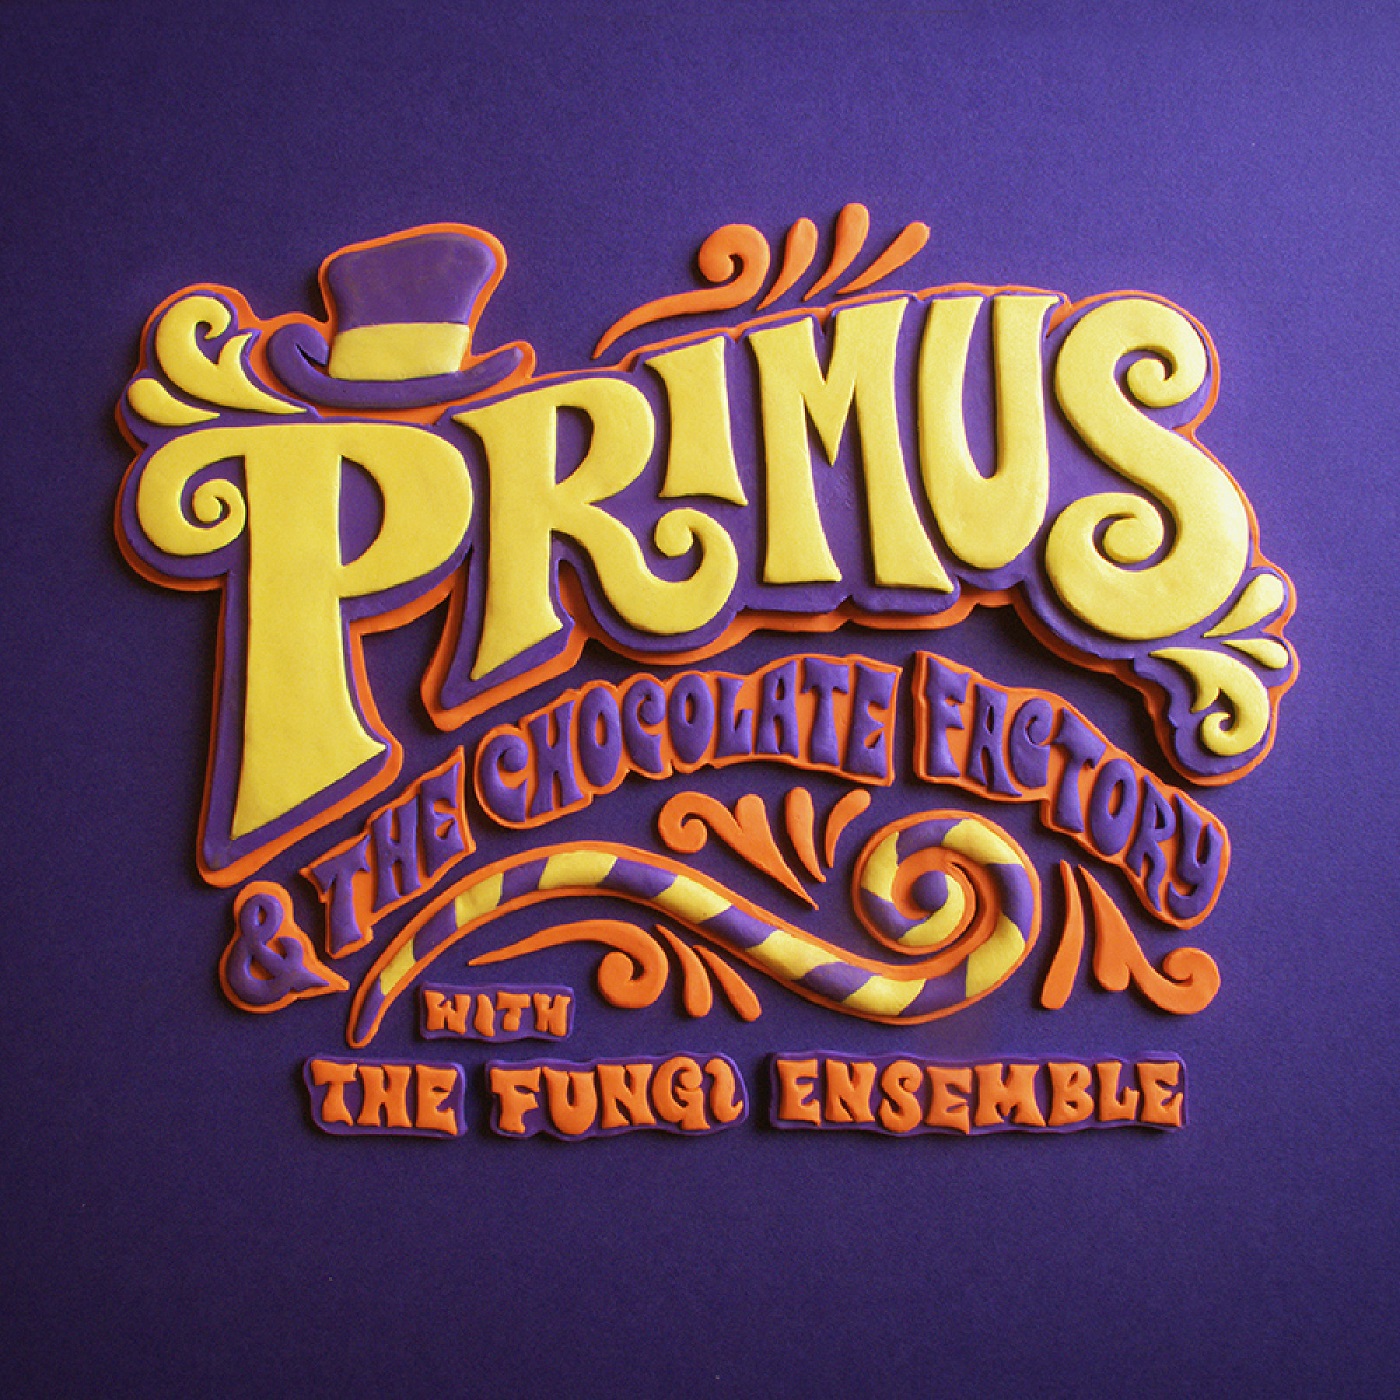 Primus’s “Primus & The Chocolate Factory” (with Rick Thompson)